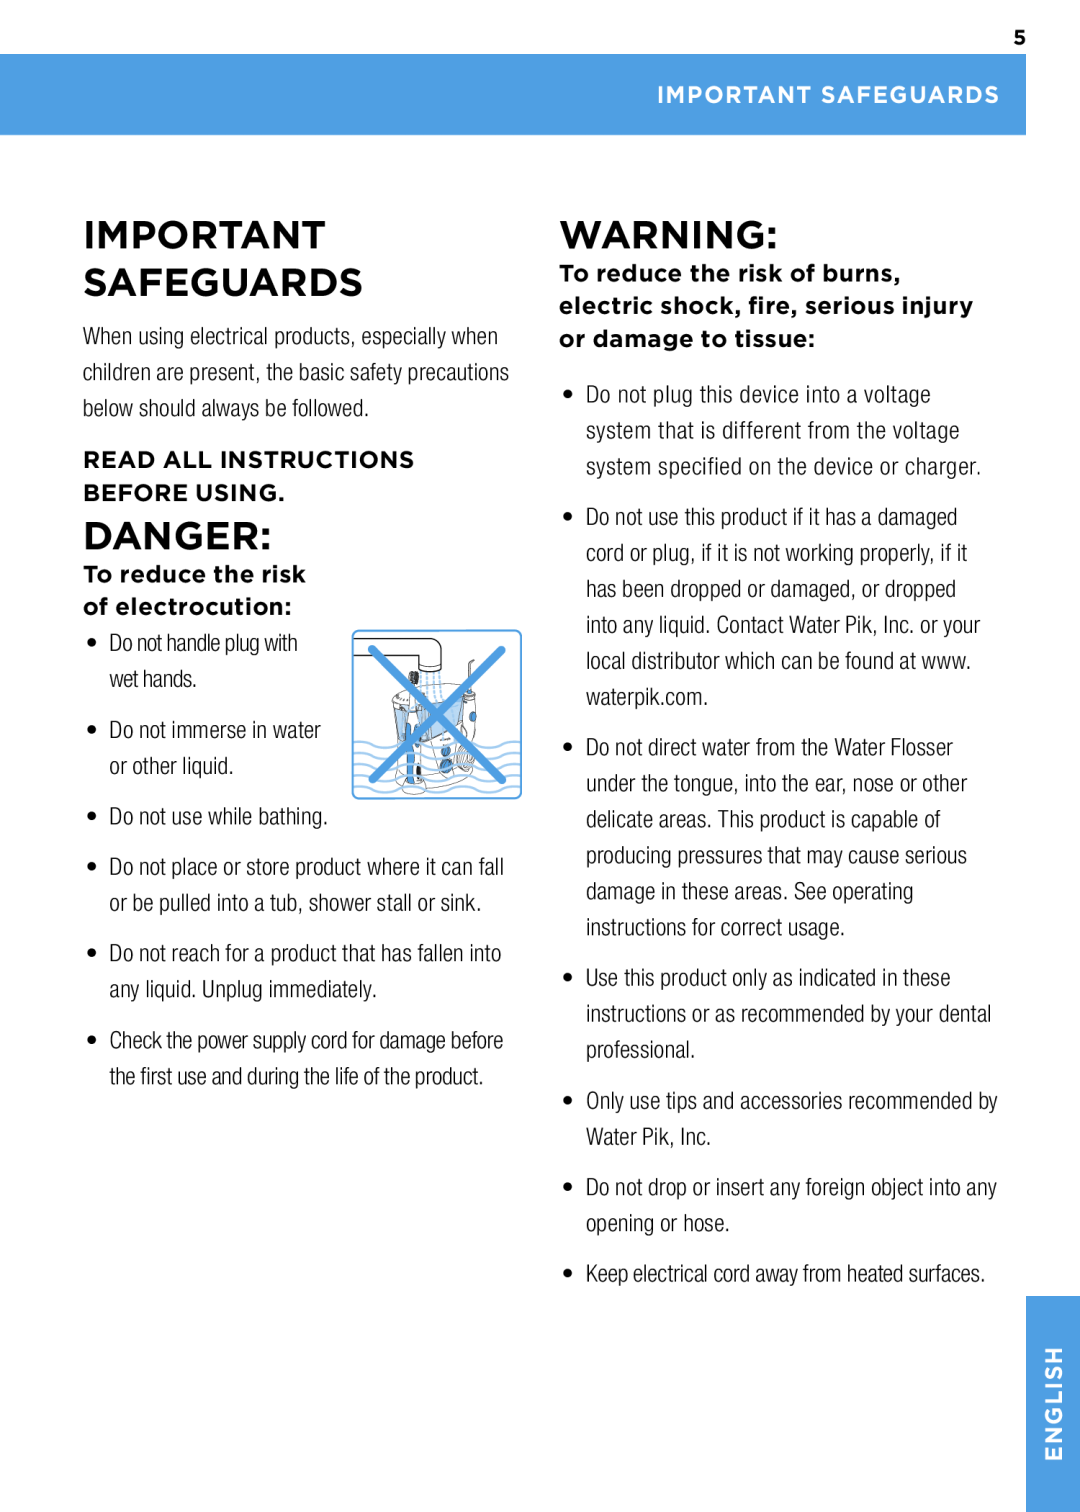 Waterpik Technologies wp-900 Danger, Important Safeguards, Read All Instructions Before Using, Water Pik, Inc, English 